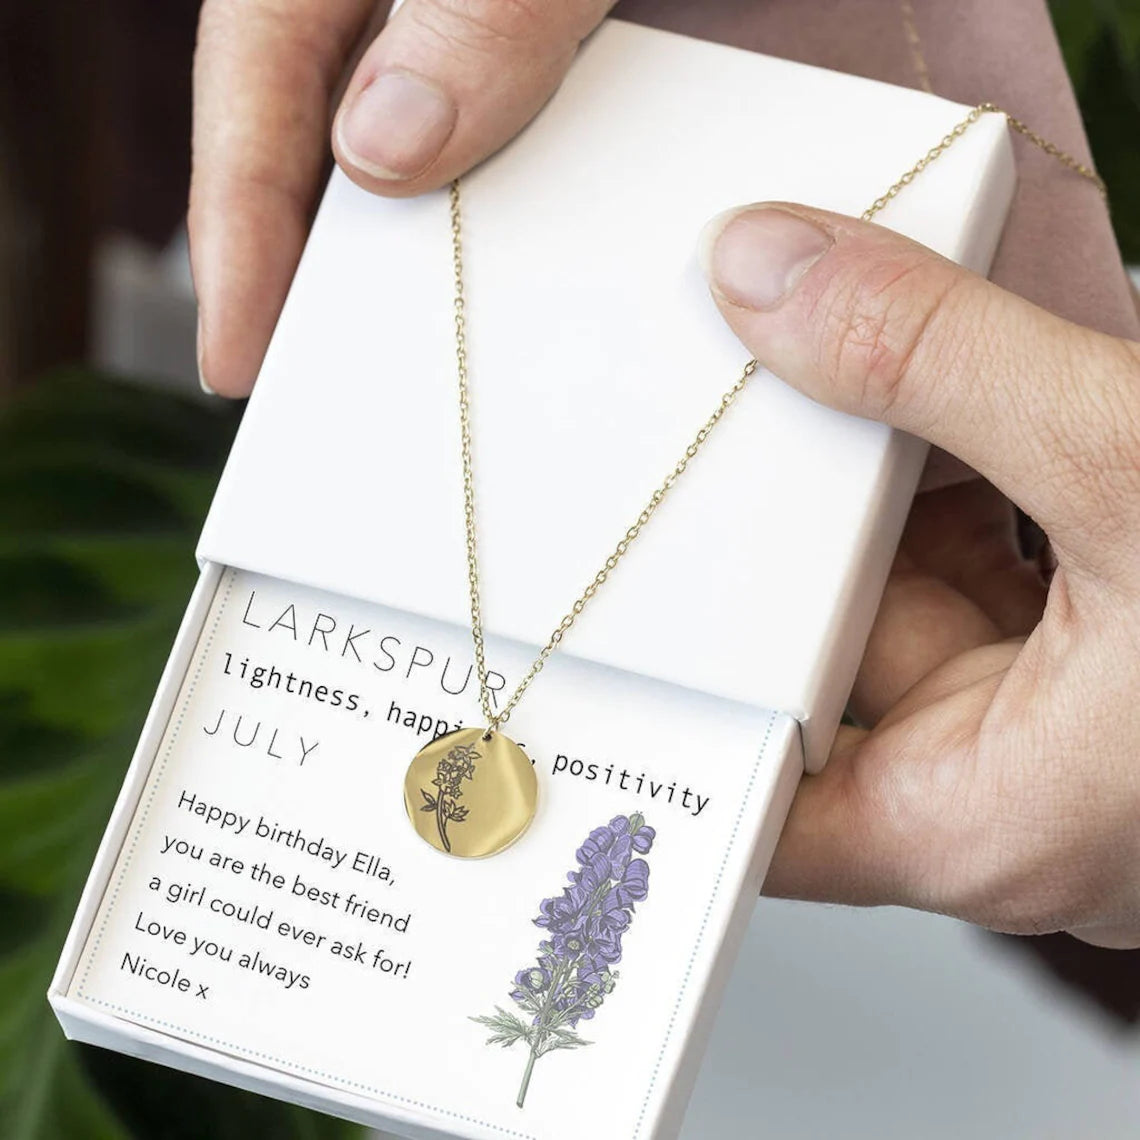 12 Month Delicate Birth Flower Necklace